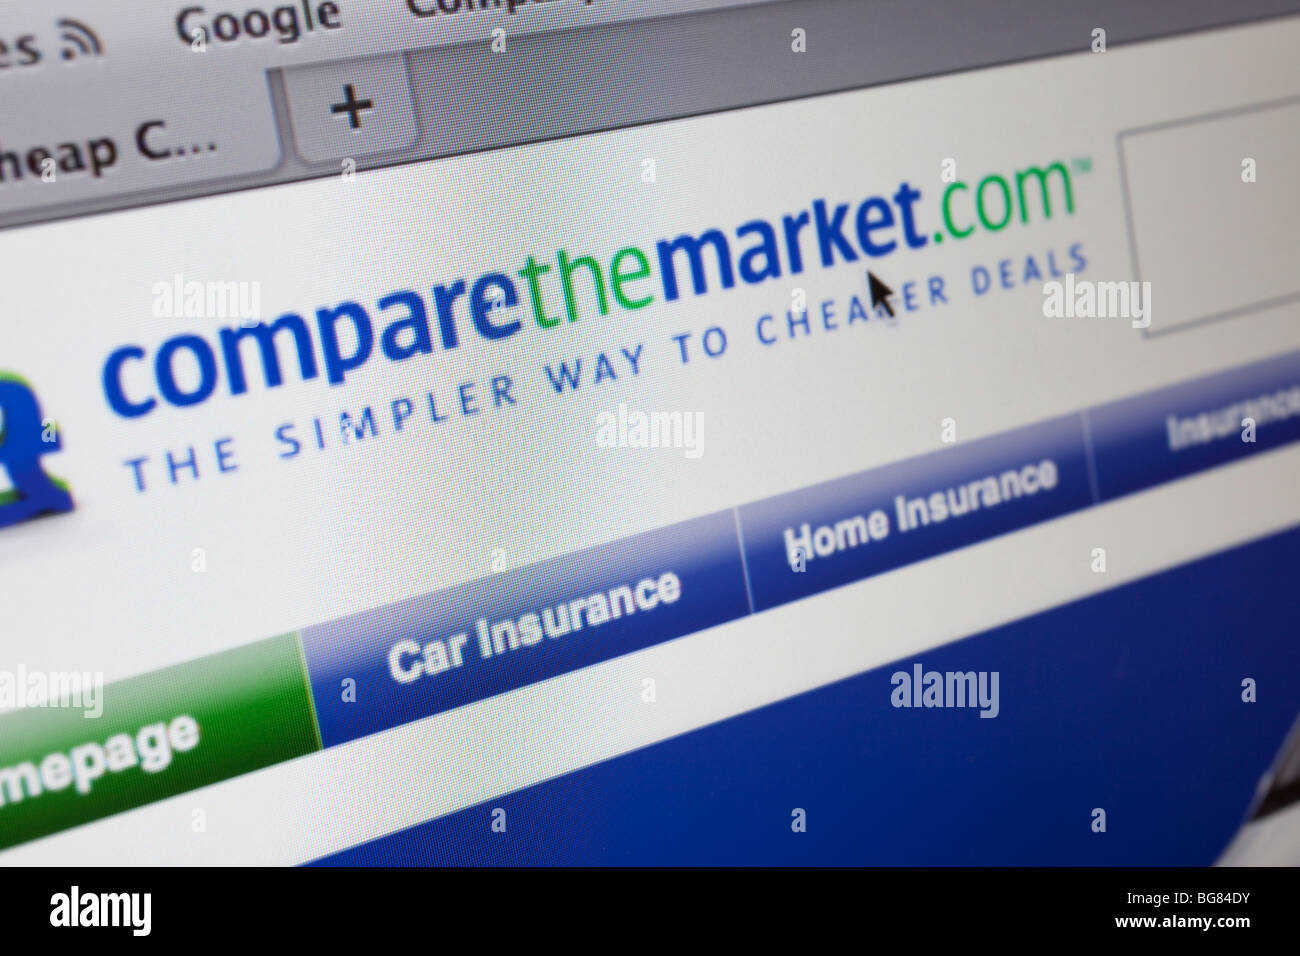 Computer screen showing the website for insurance, money and finance comparison site, Compare the Market. Stock Photo